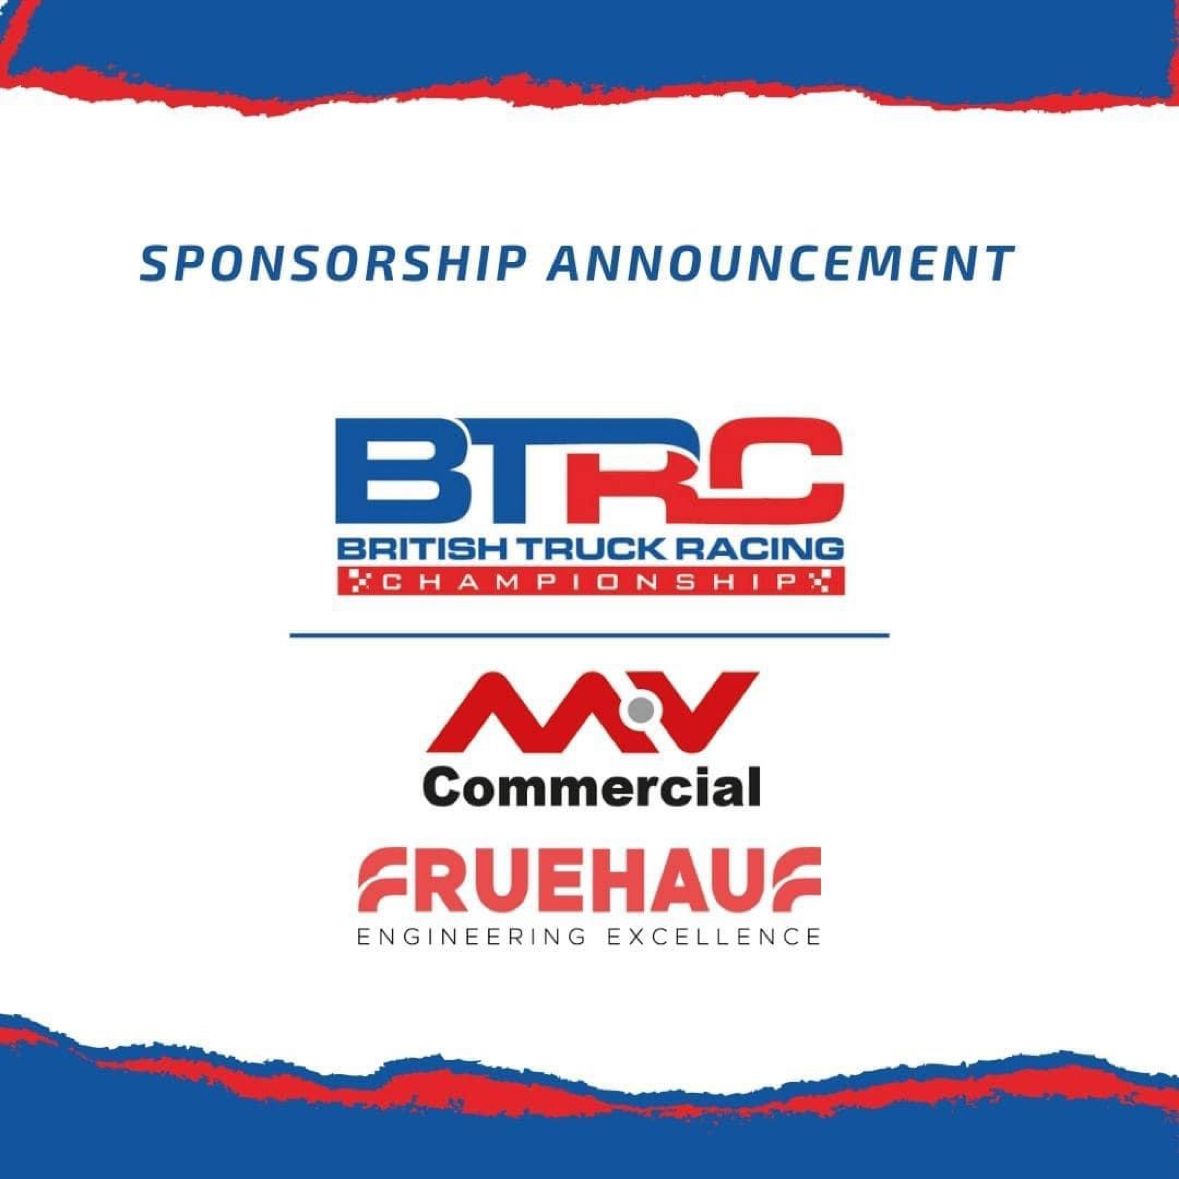 Image for PR | MV Commercial Group renews long-standing partnership with the BTRC for 2023